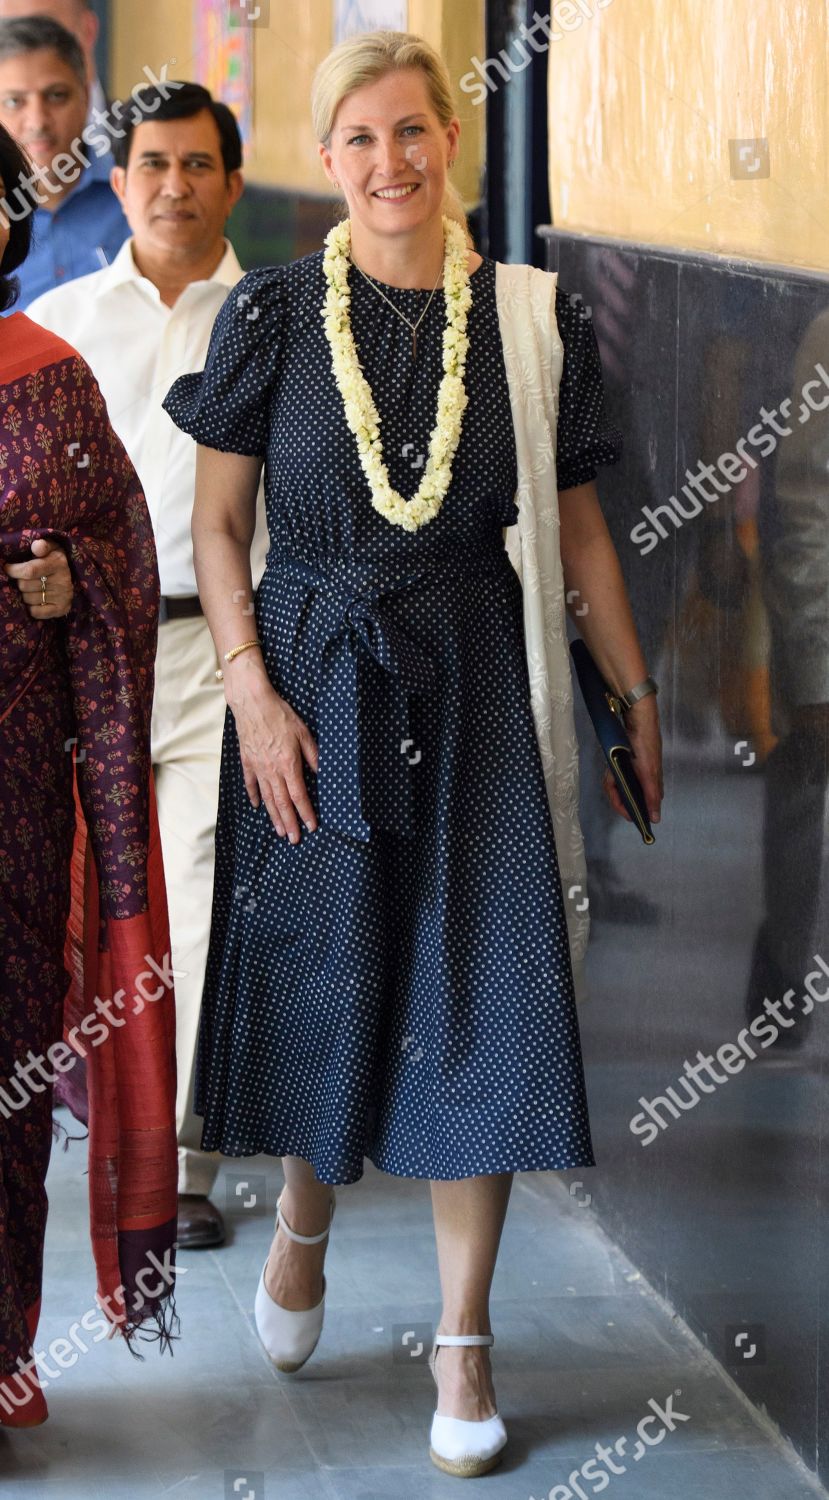 sophie-countess-of-wessex-visit-to-india-shutterstock-editorial-10227195af.jpg